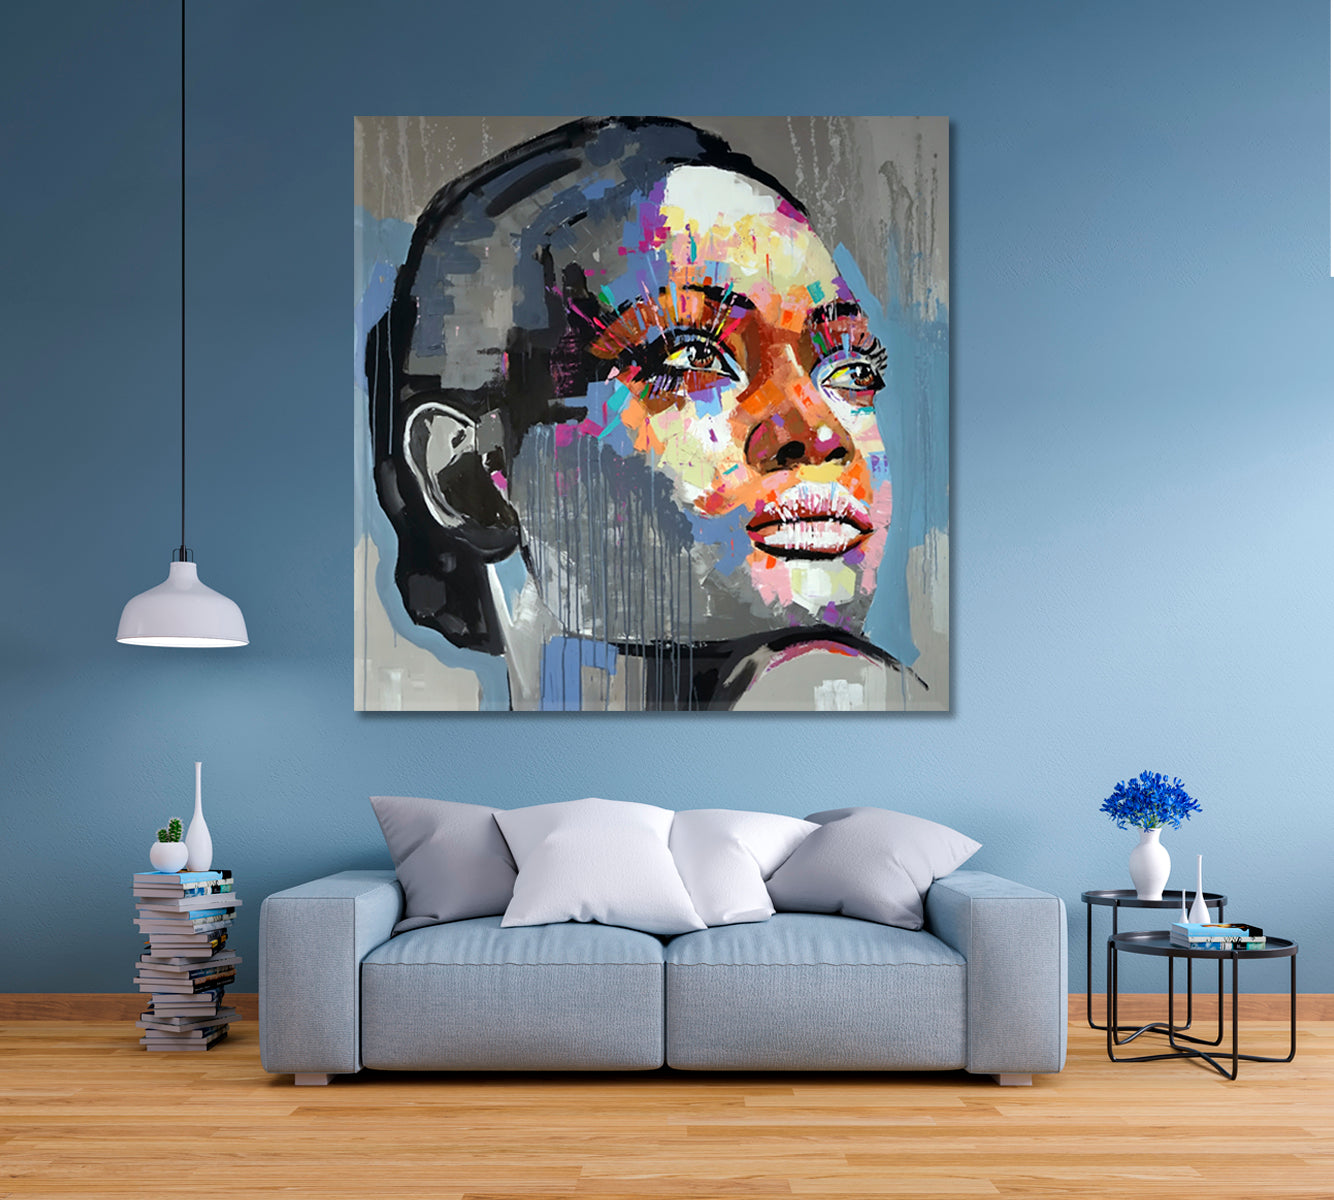 MISS MAGIC Abstract Art Grunge Street Art Style Canvas Print - Square People Portrait Wall Hangings Artesty   